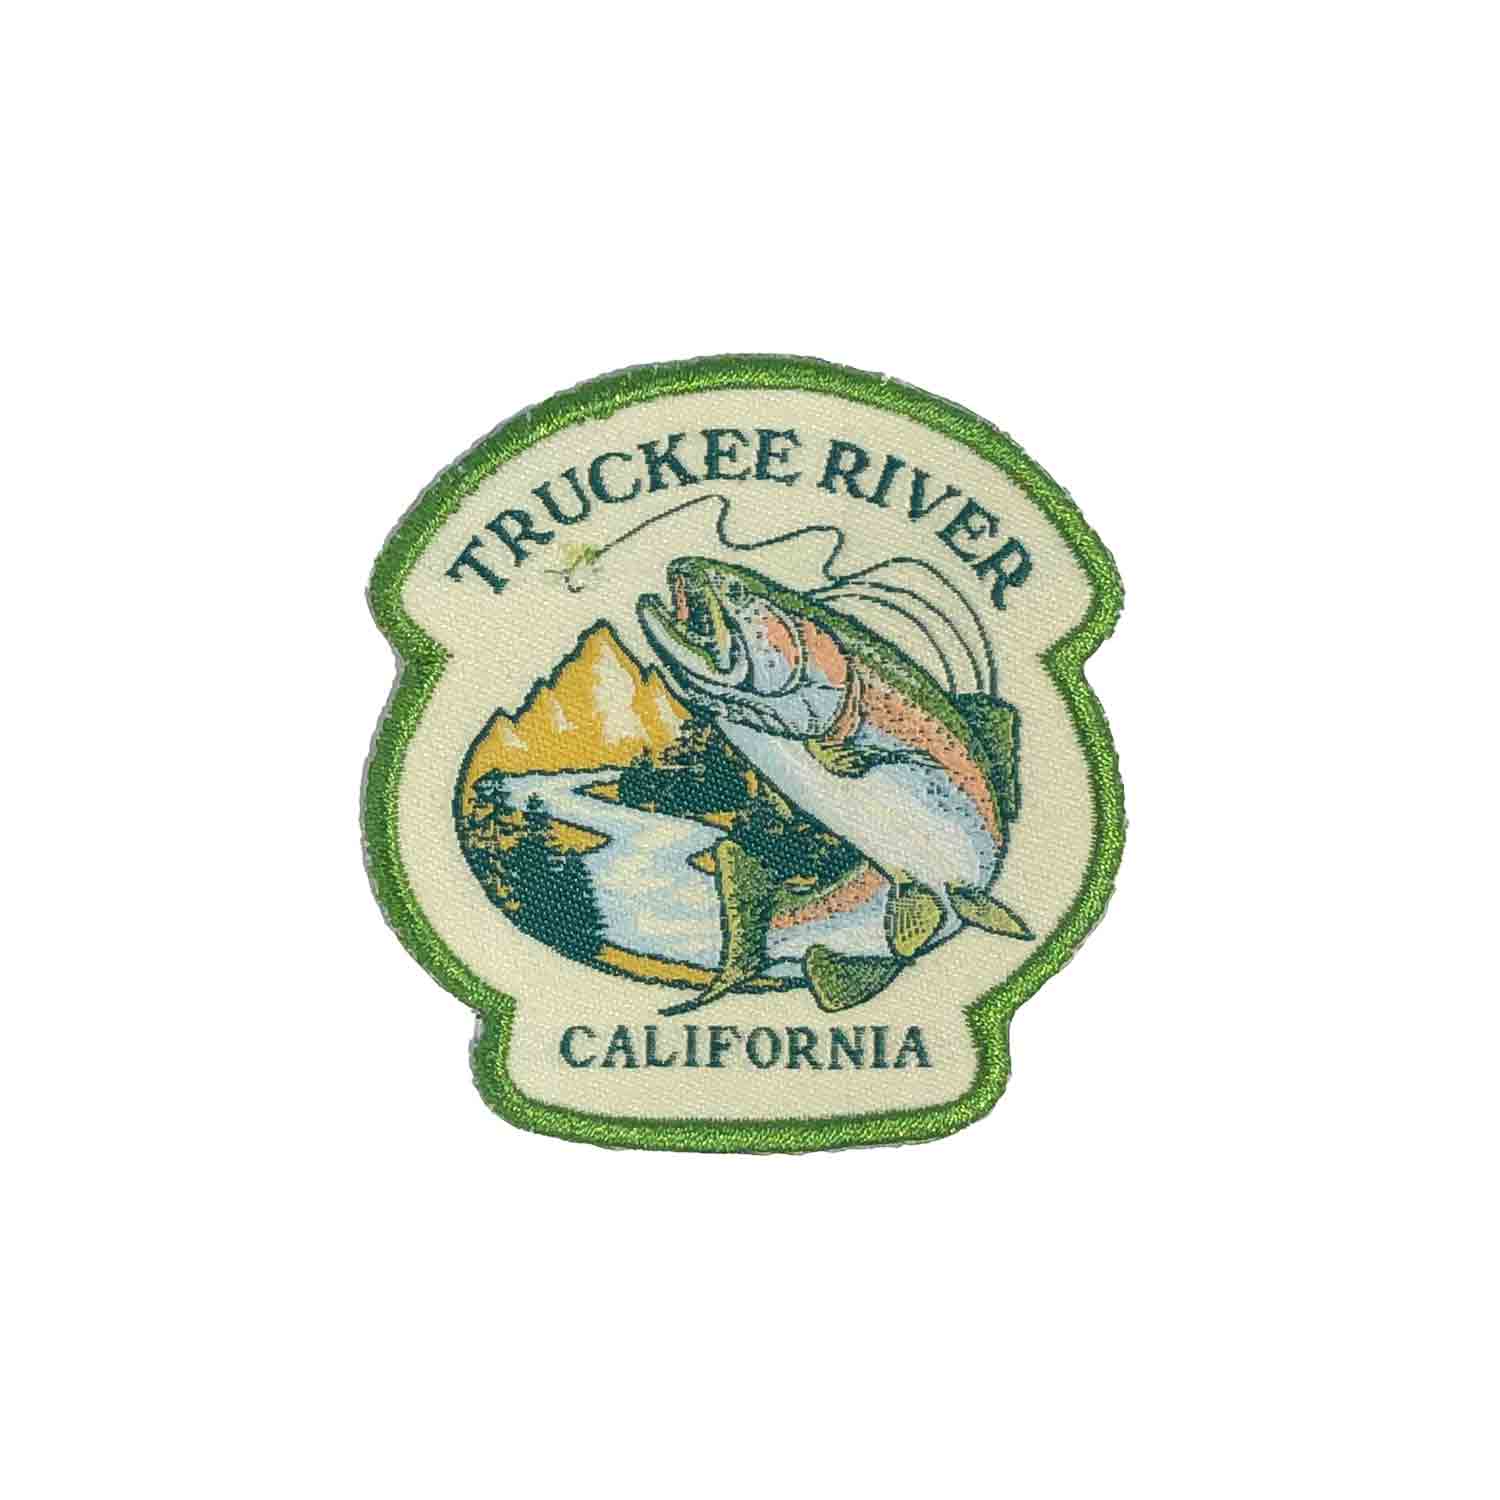 TRUCKEE RIVER CALIFORNIA PATCH